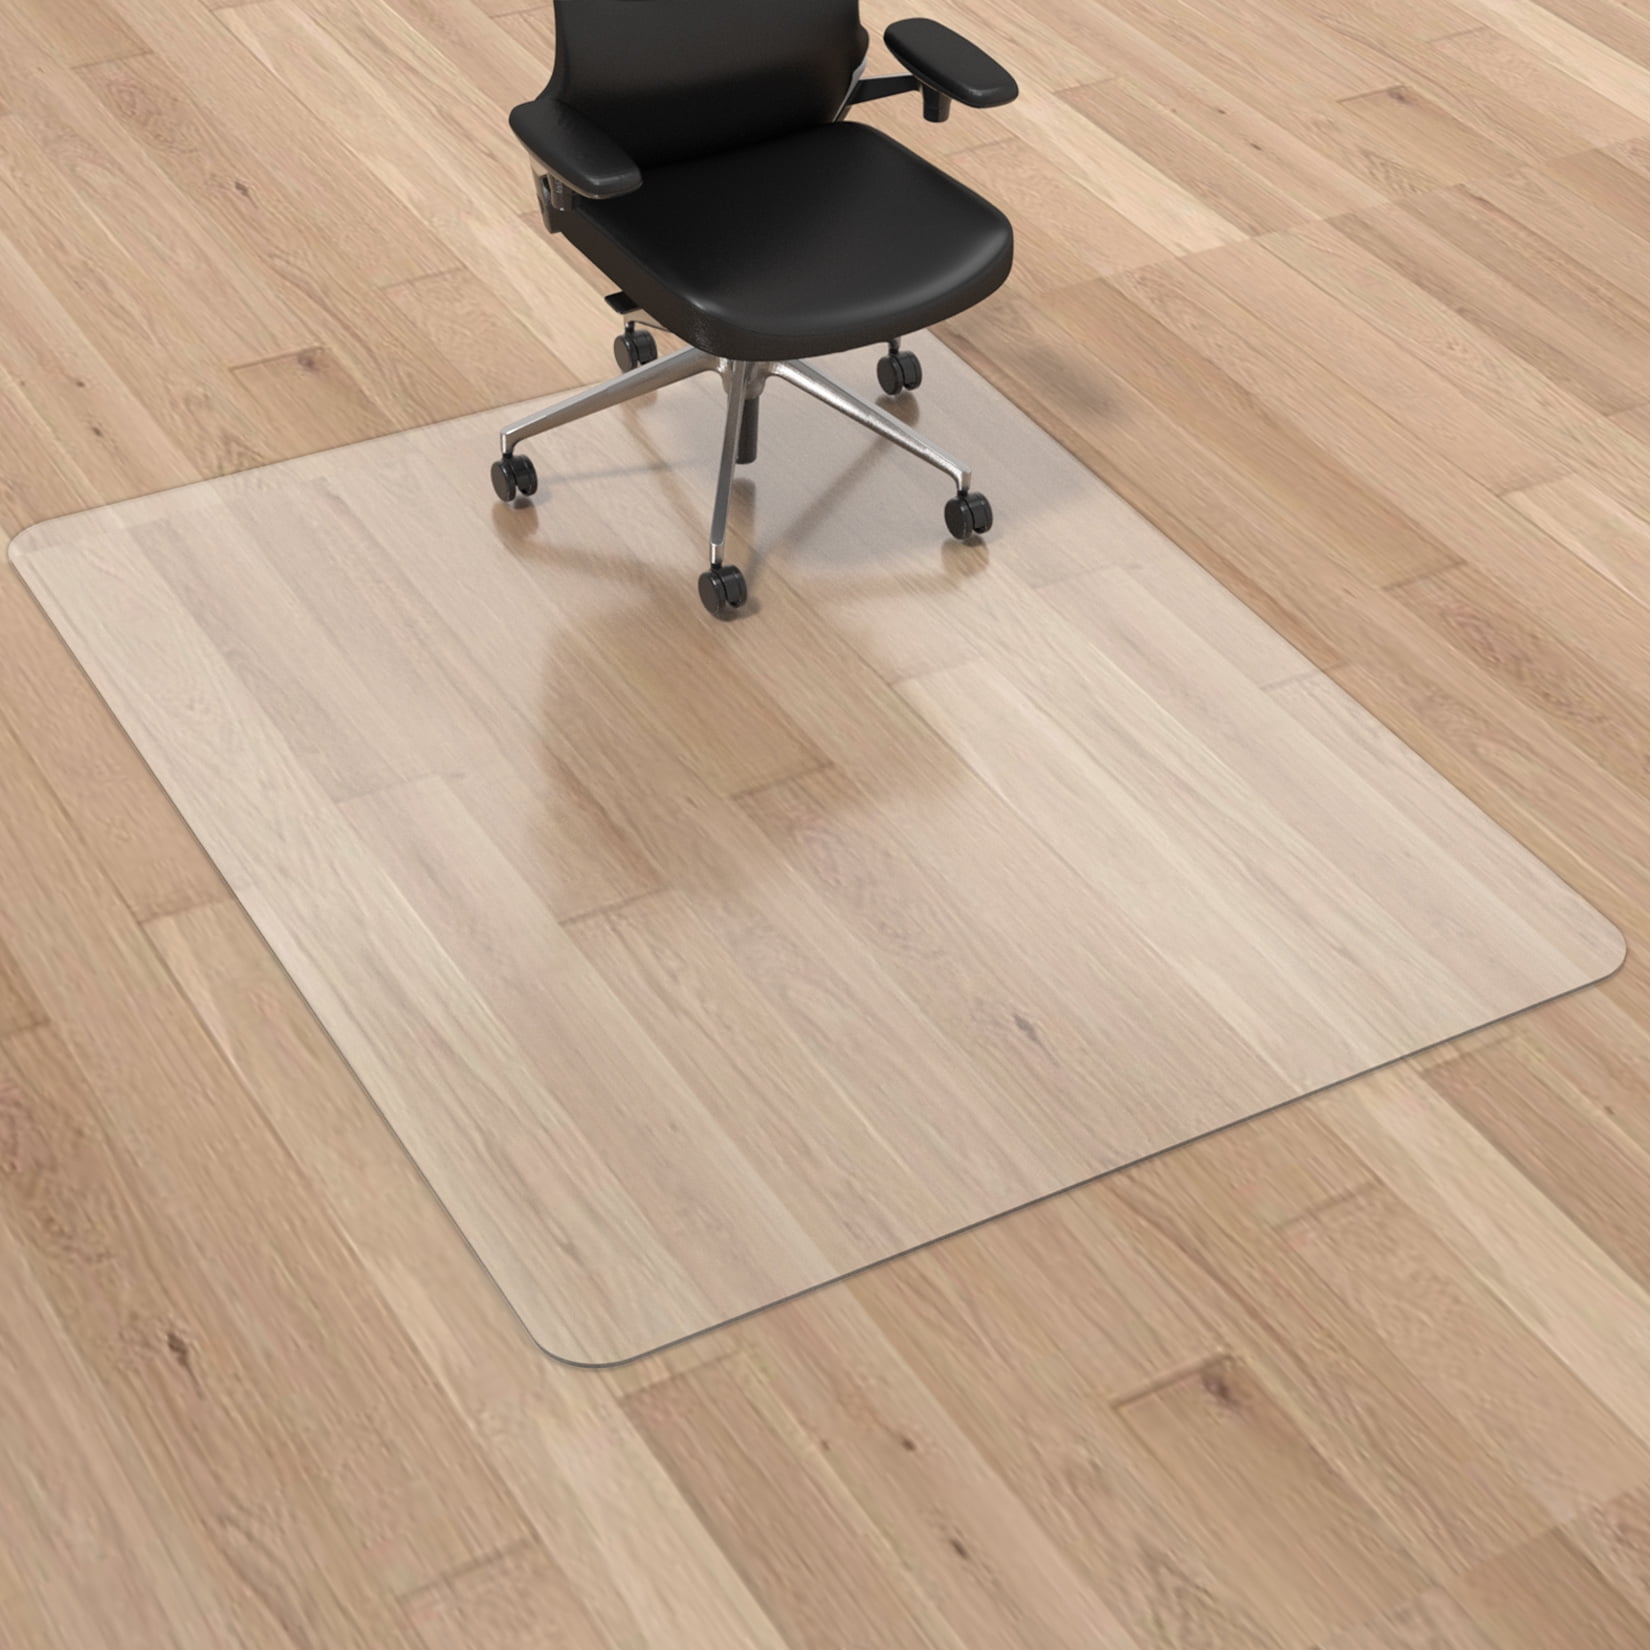 OFM Office Chair Mat for Carpet – Computer Desk Chair Mat for Carpeted  Floors – Easy Glide Rolling Plastic Floor Mat for Work, Home, Gaming with